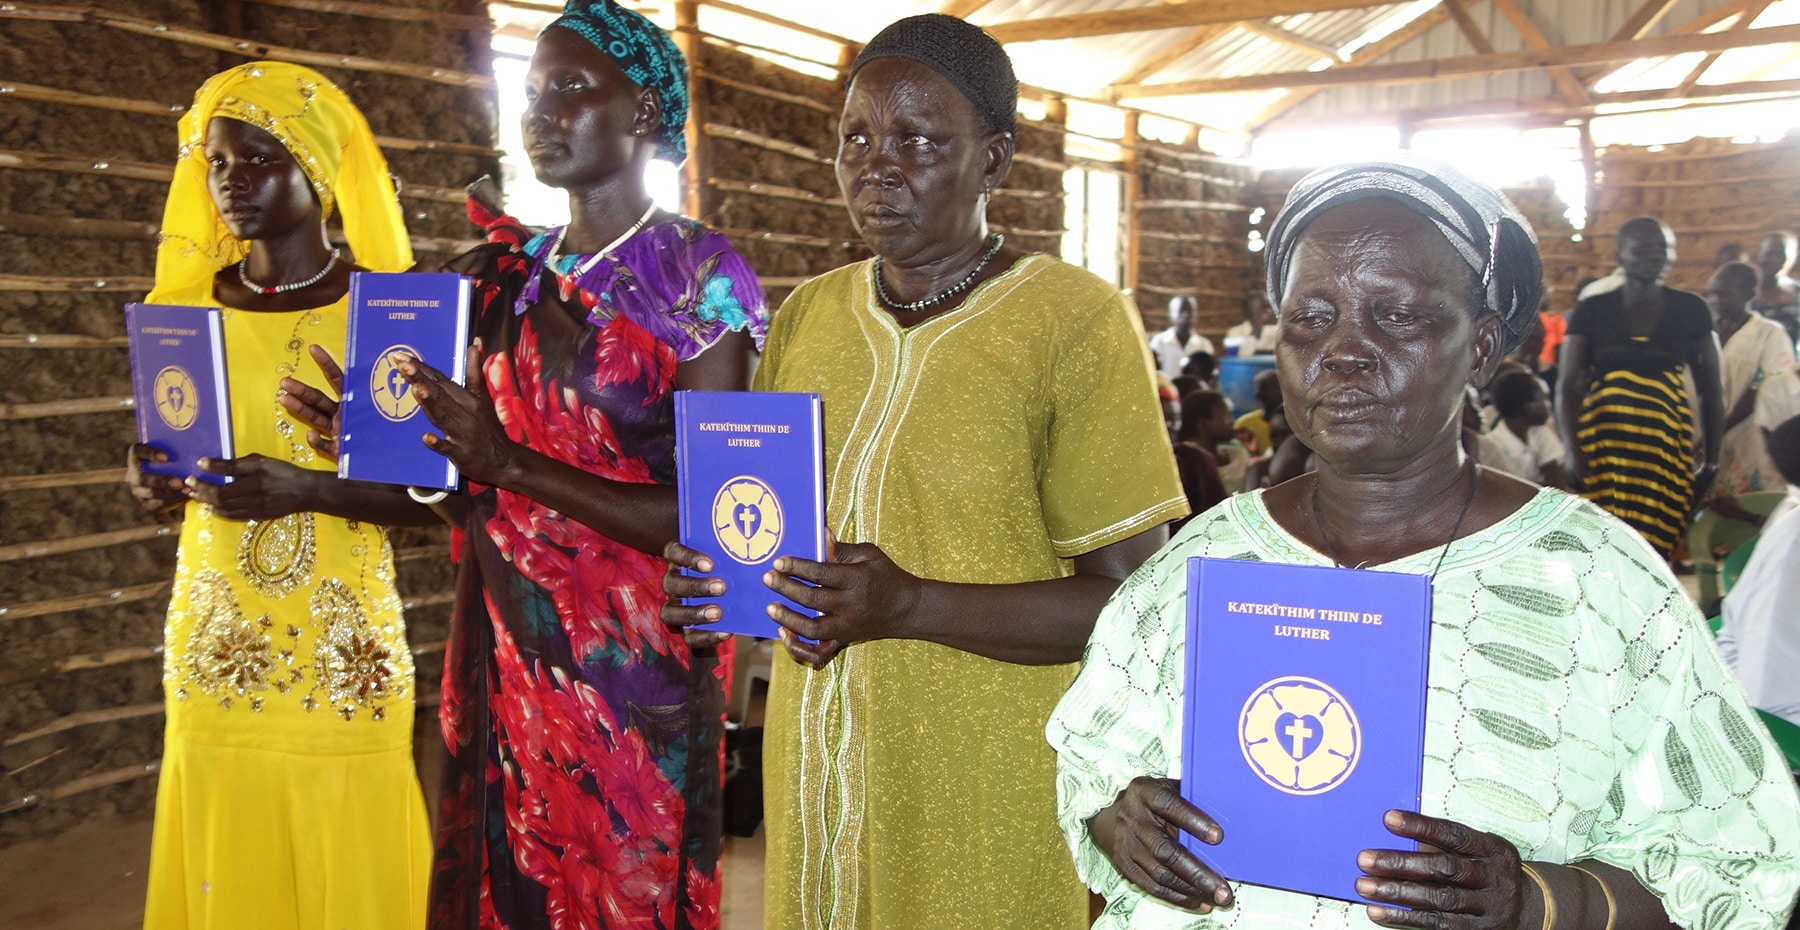 Sudan Dinka Women Holding Luther's Small Catechisms